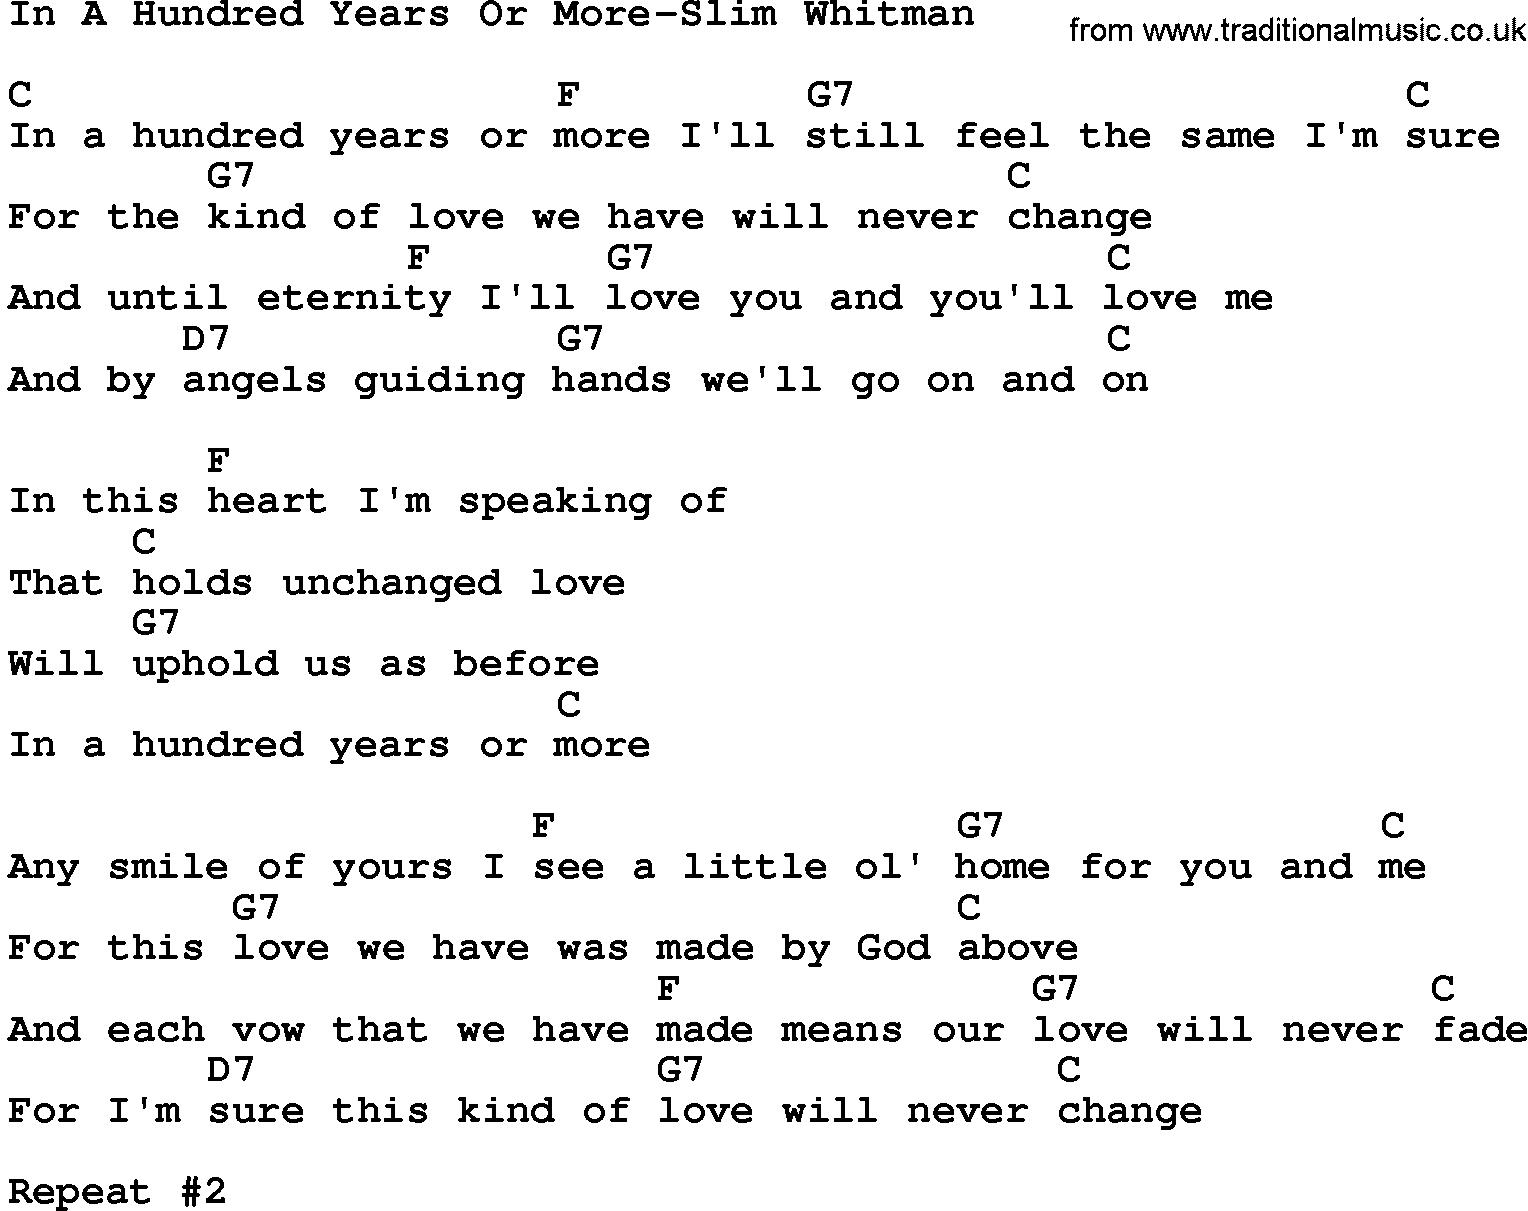 Country music song: In A Hundred Years Or More-Slim Whitman lyrics and chords